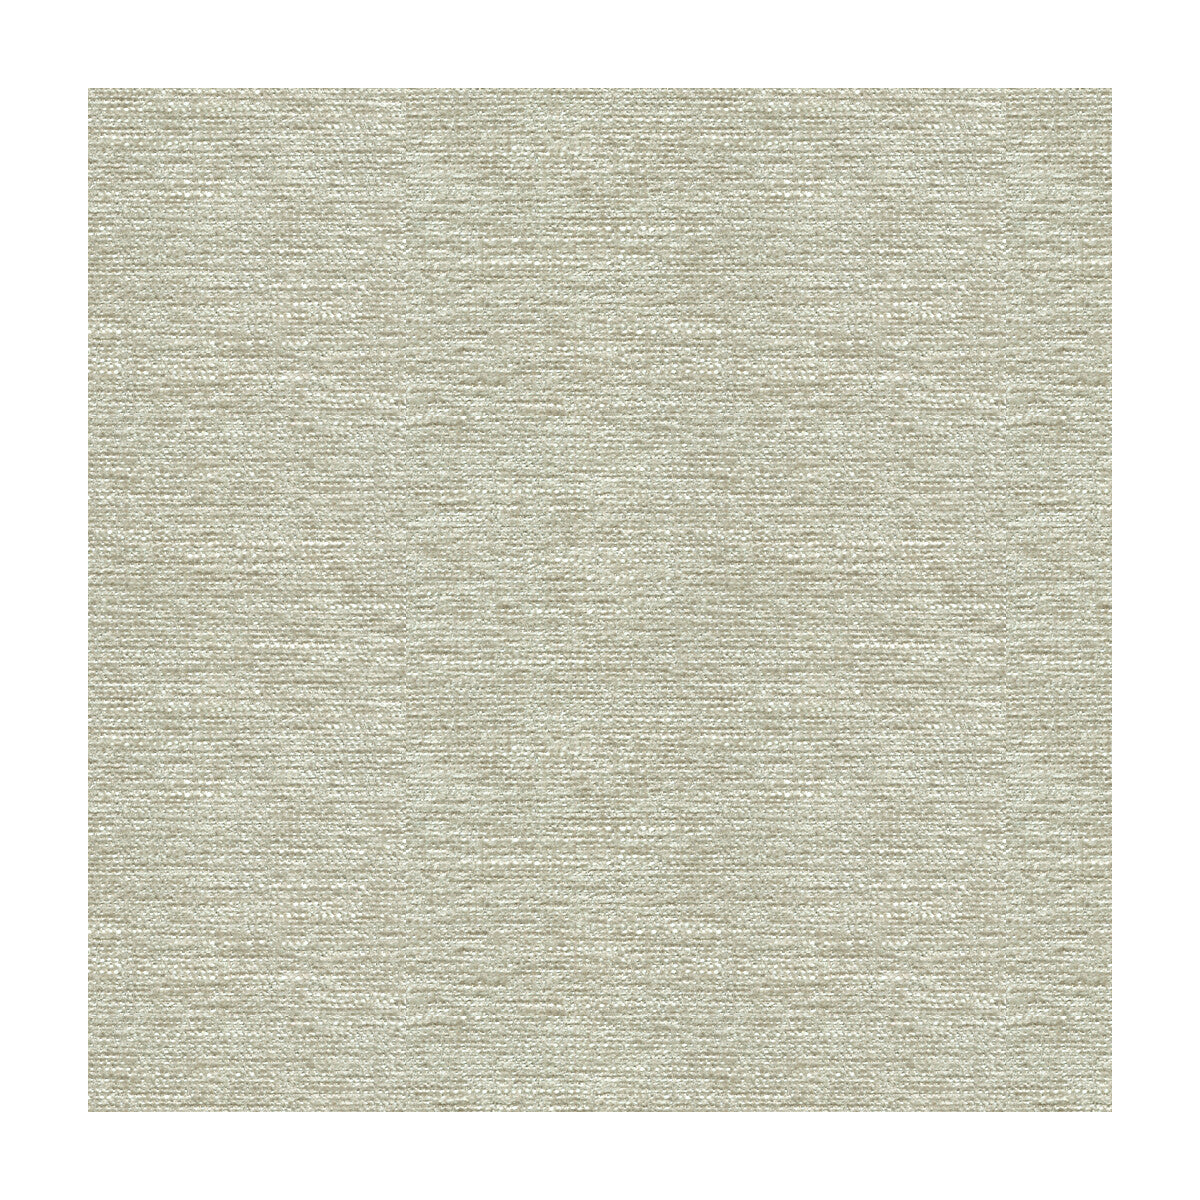 Beacon fabric in quartz color - pattern 34182.11.0 - by Kravet Contract in the Crypton Incase collection